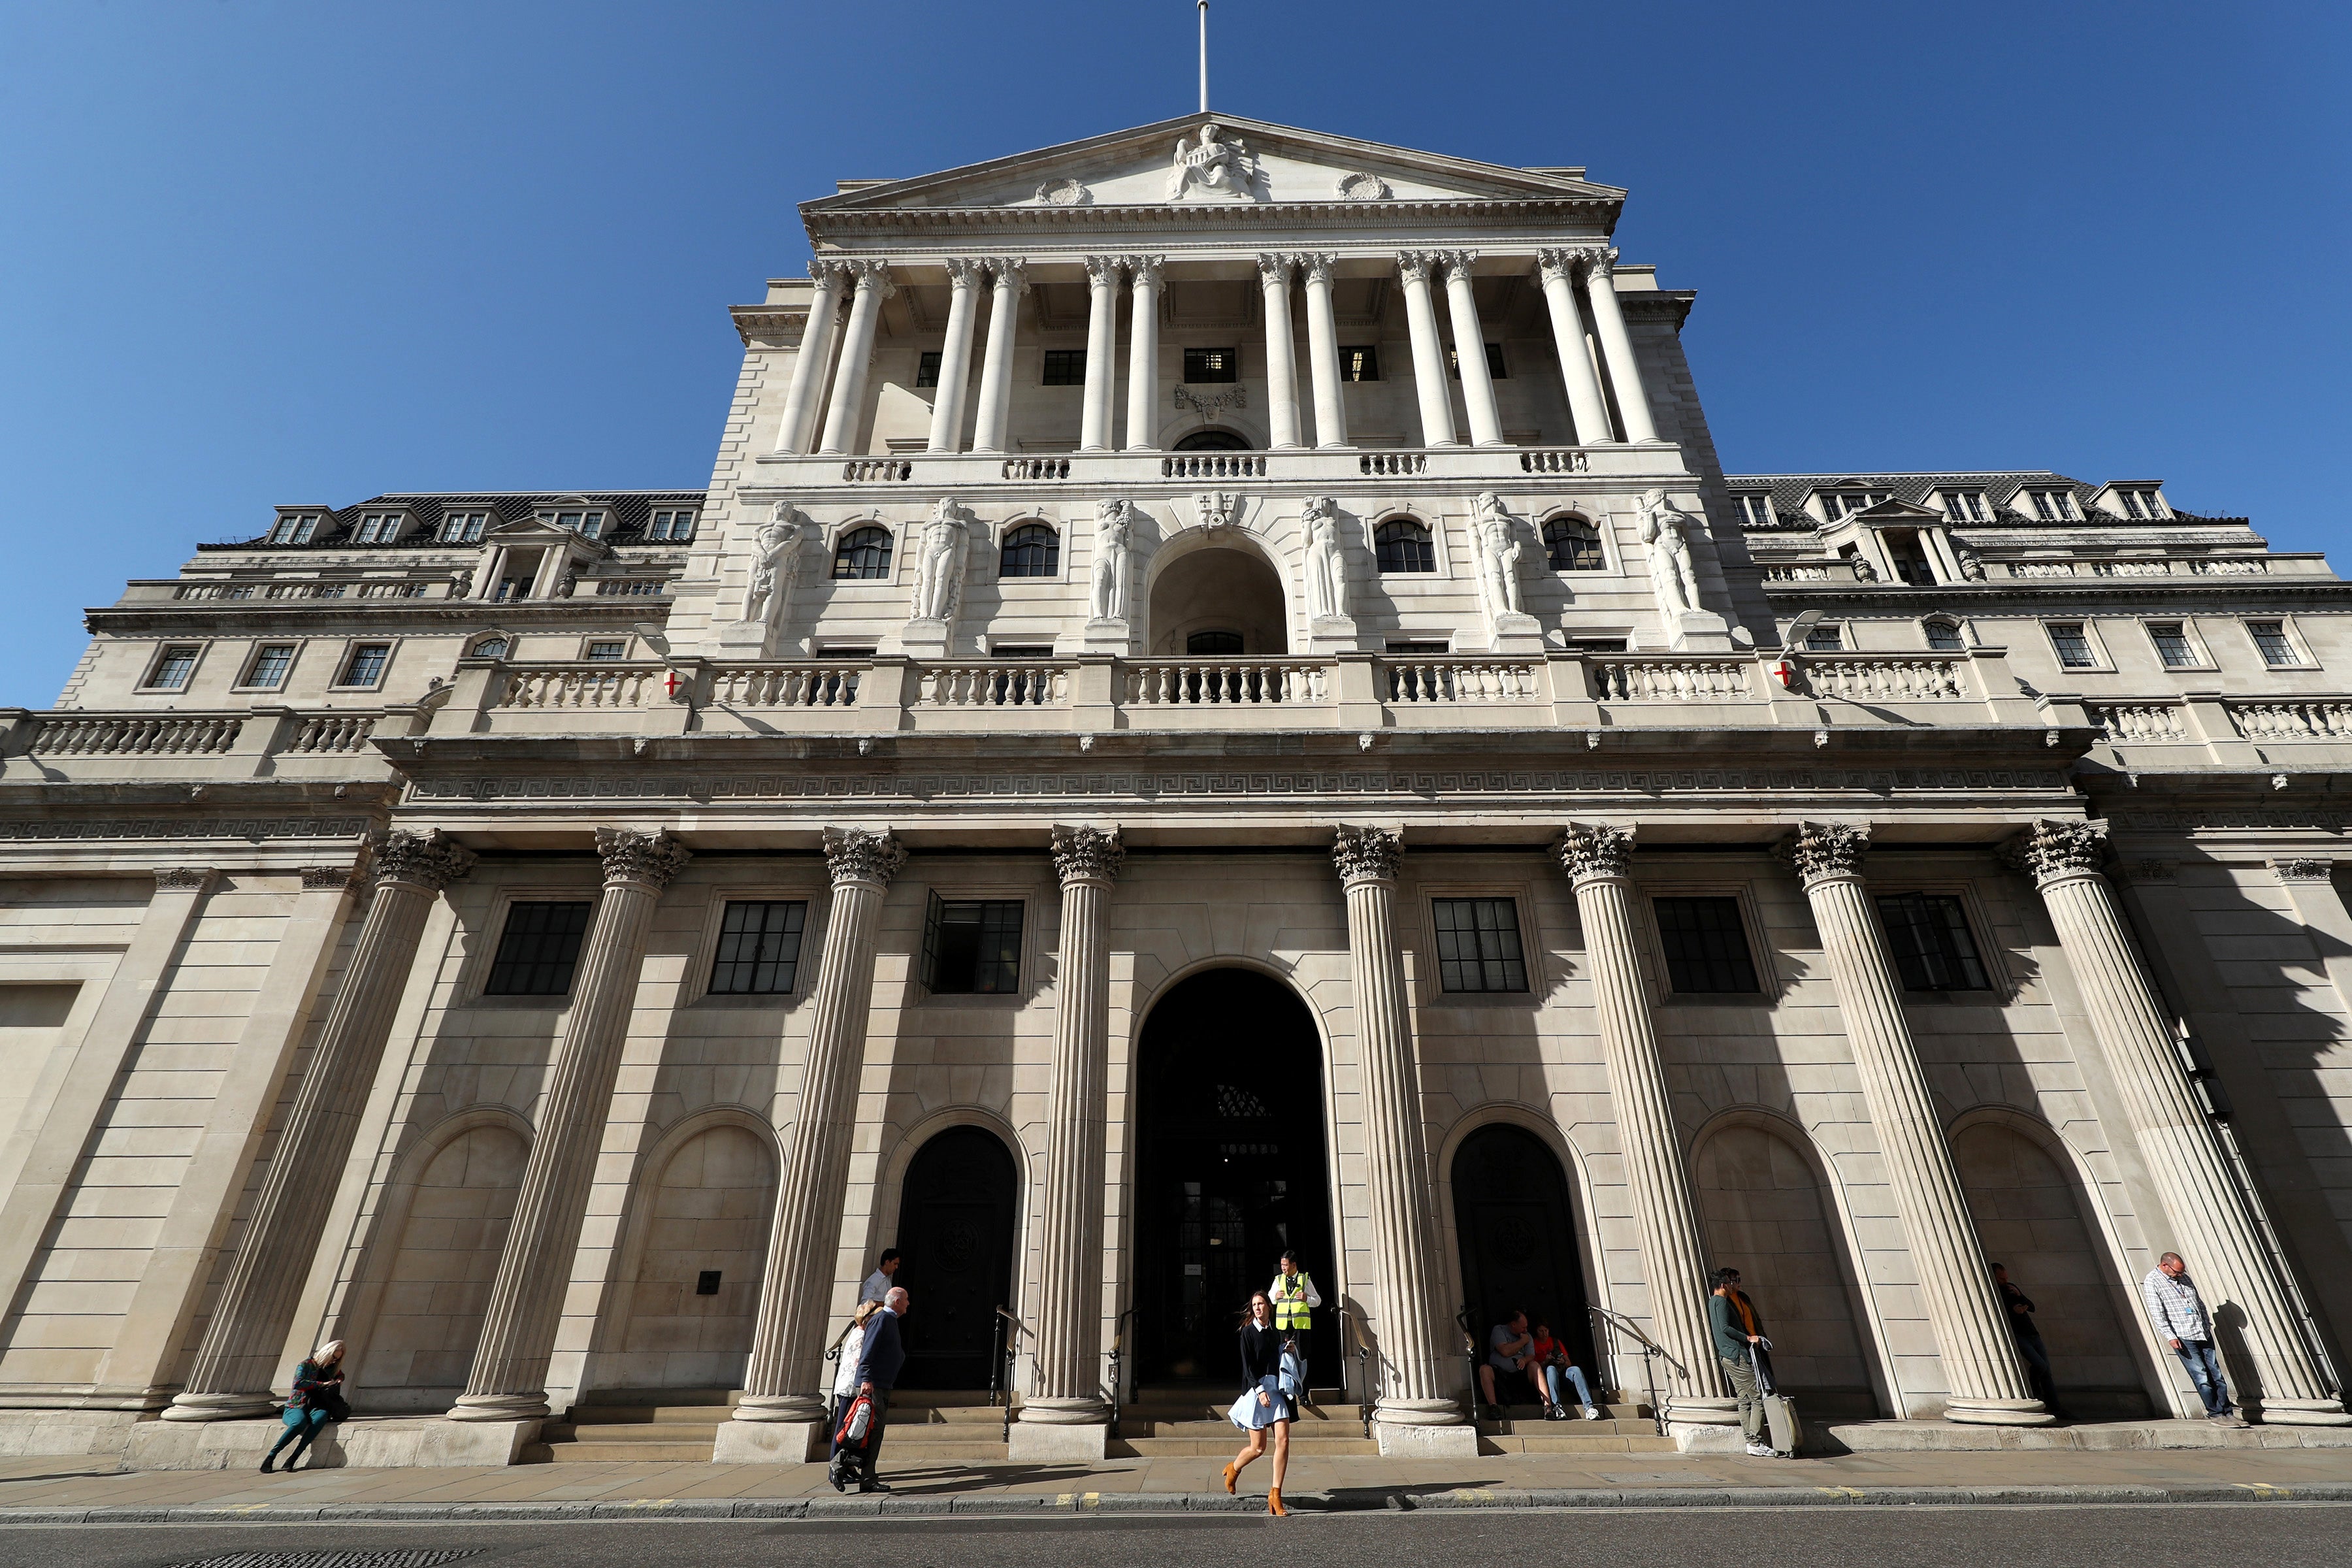 The Bank of England thinks inflation spike will be temporary. The City largely agrees